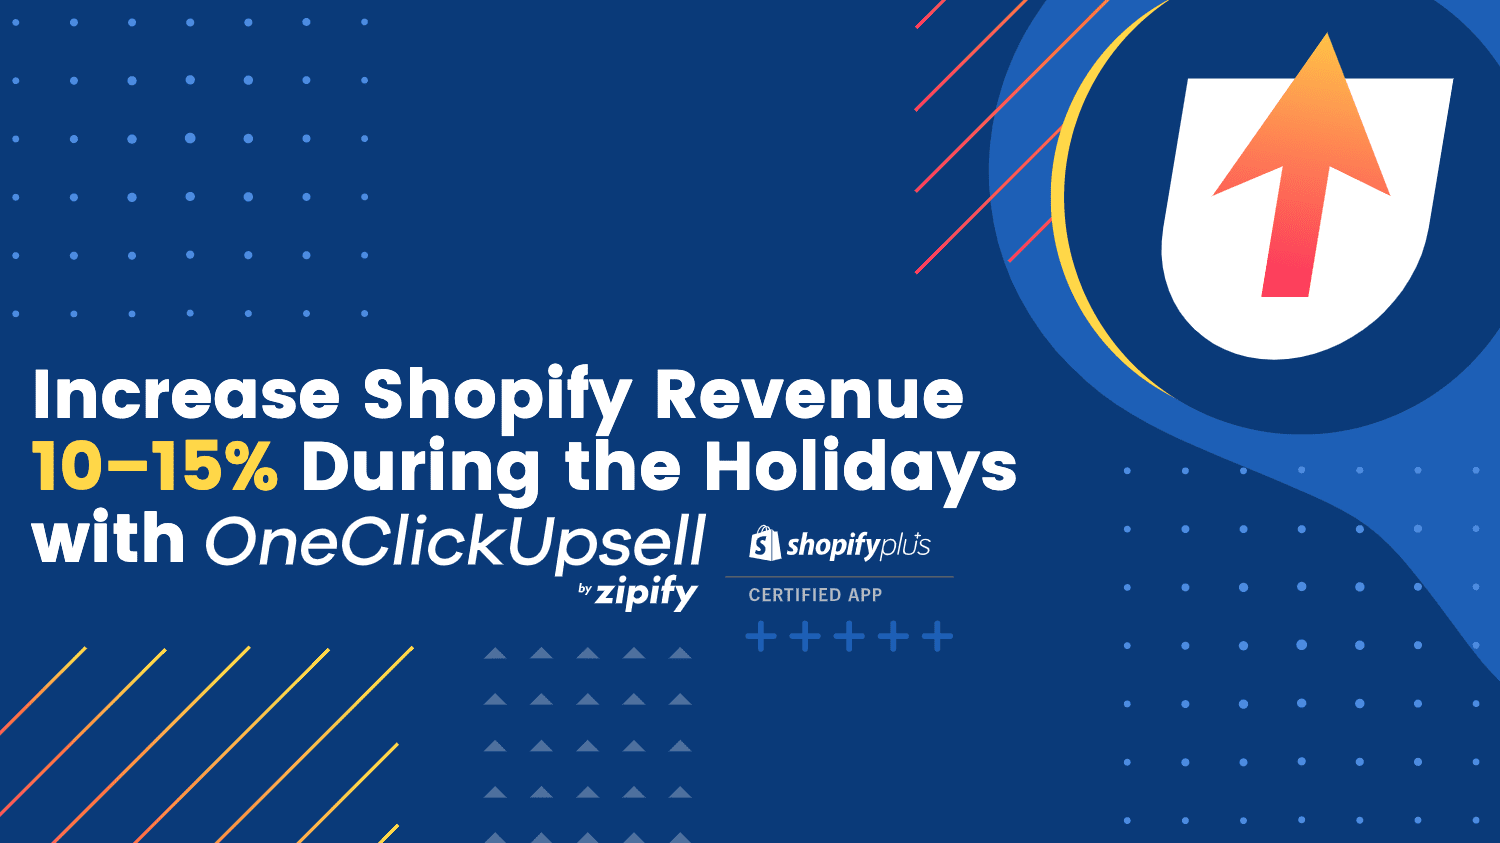 Increase Shopify Revenue 10-15% During the Holidays with OneClickUpsell